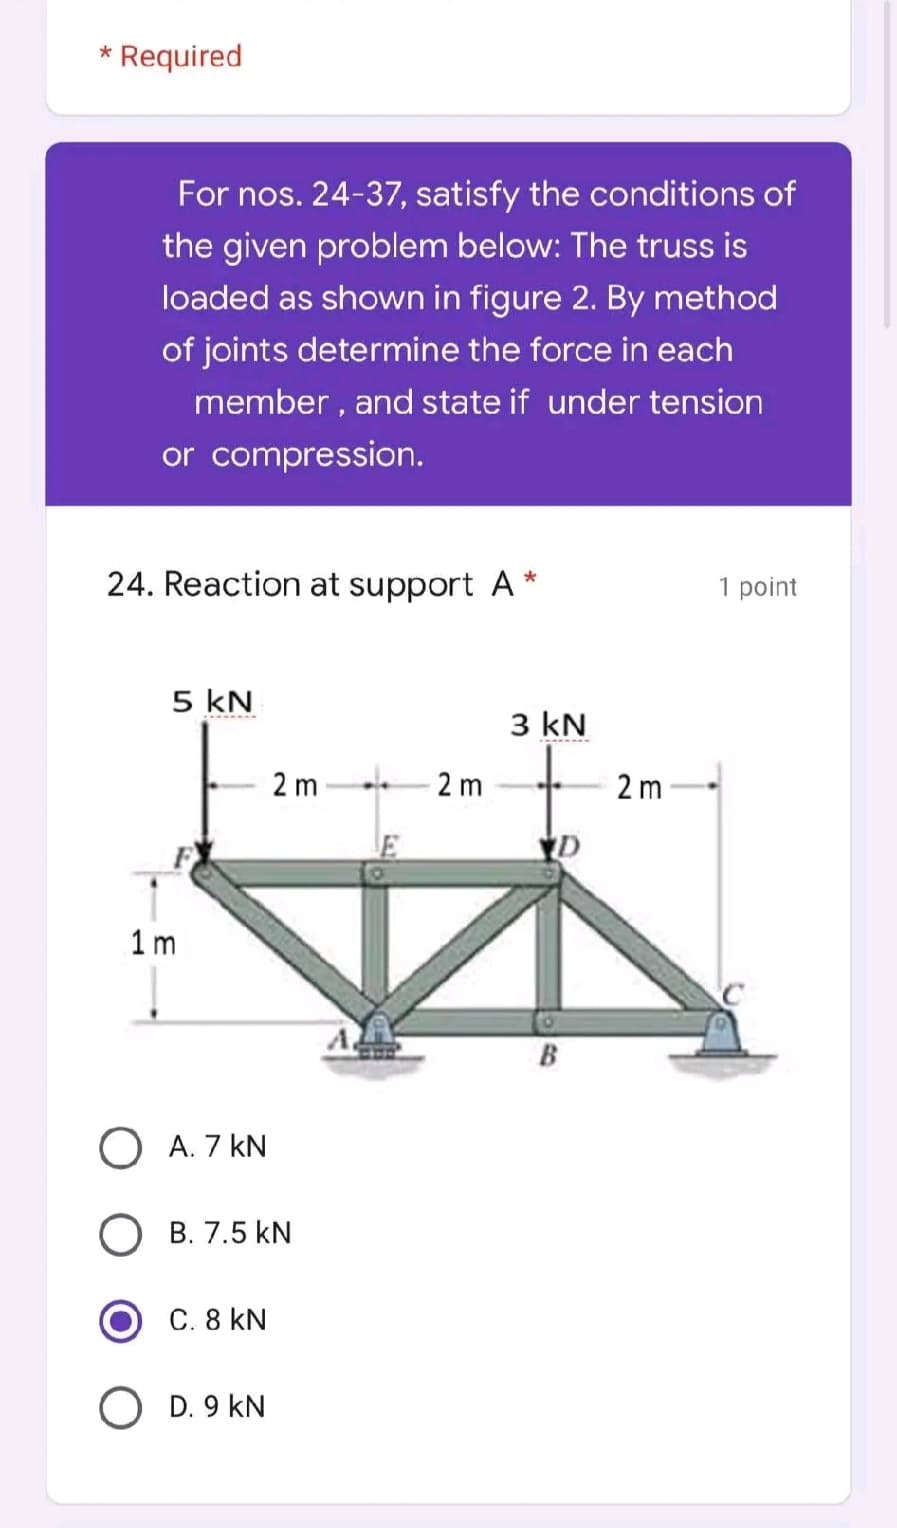 * Required
For nos. 24-37, satisfy the conditions of
the given problem below: The truss is
loaded as shown in figure 2. By method
of joints determine the force in each
member, and state if under tension
or compression.
24. Reaction at support A *
1 point
5 kN
2m
1m
O A. 7 KN
O B. 7.5 kN
C. 8 KN
O D. 9 KN
2m
3 kN
B
2m